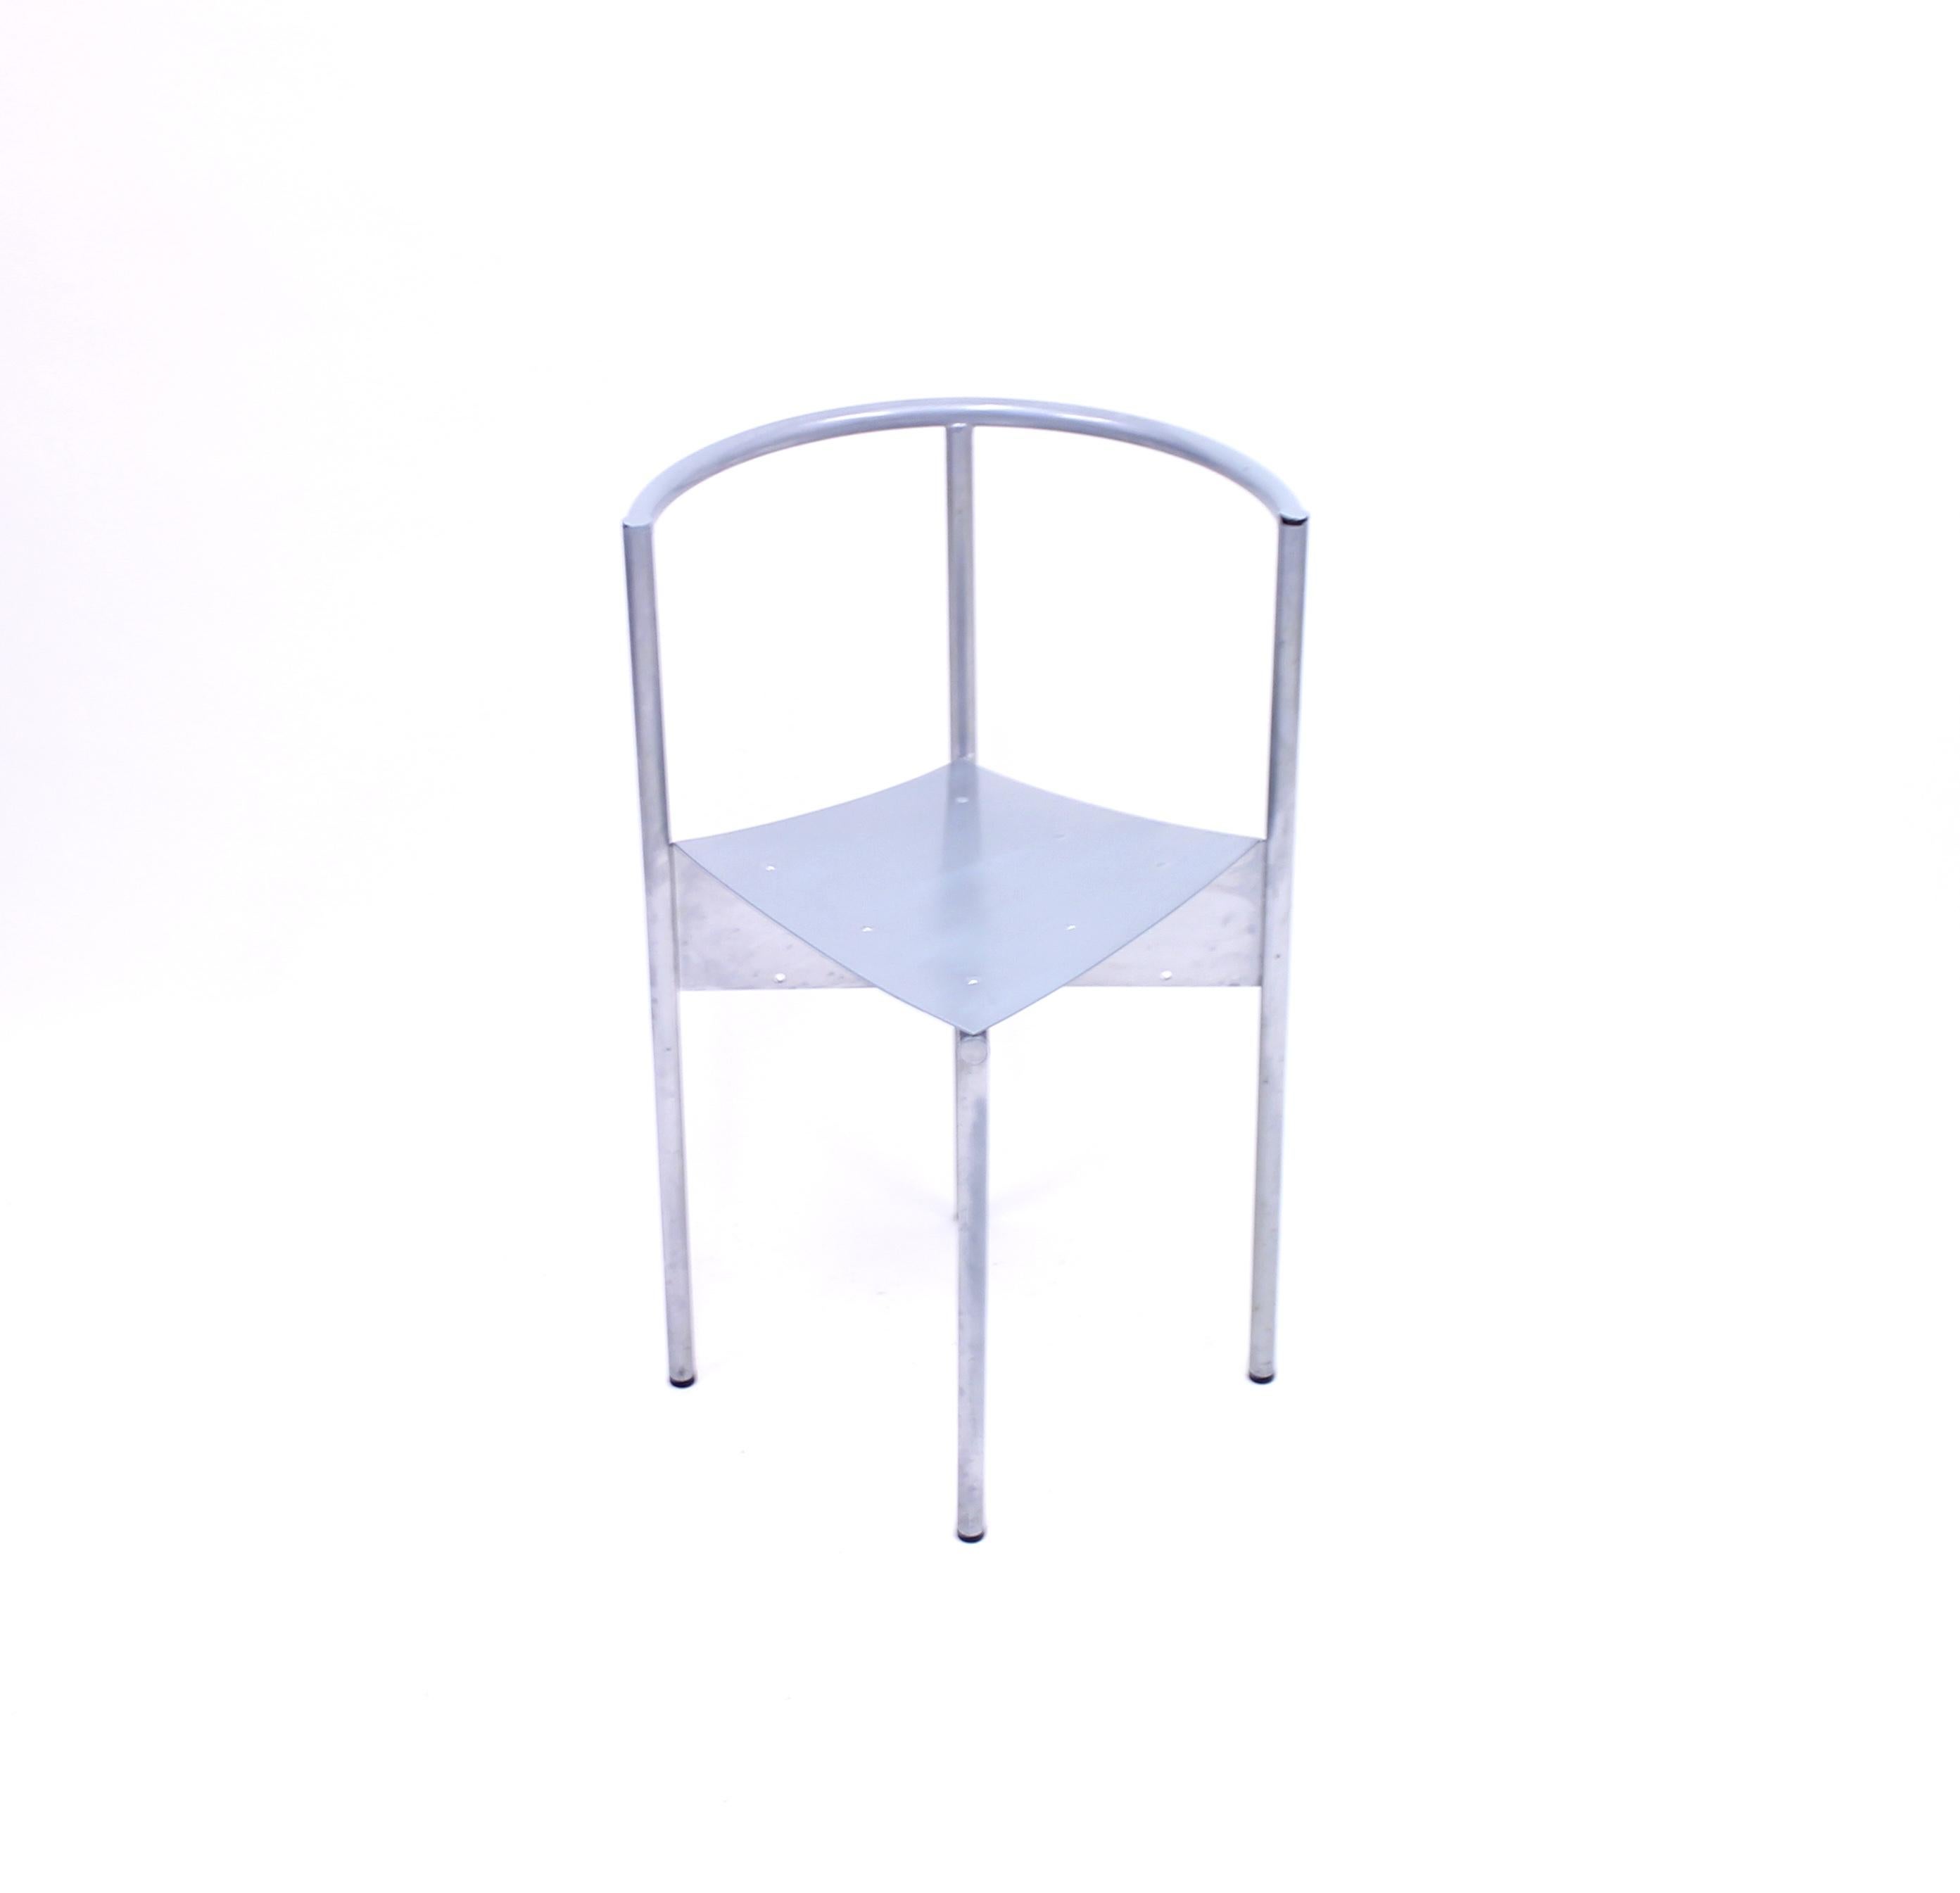 Late 20th Century Philippe Starck, Wendy Wright Chair, Disform, 1986